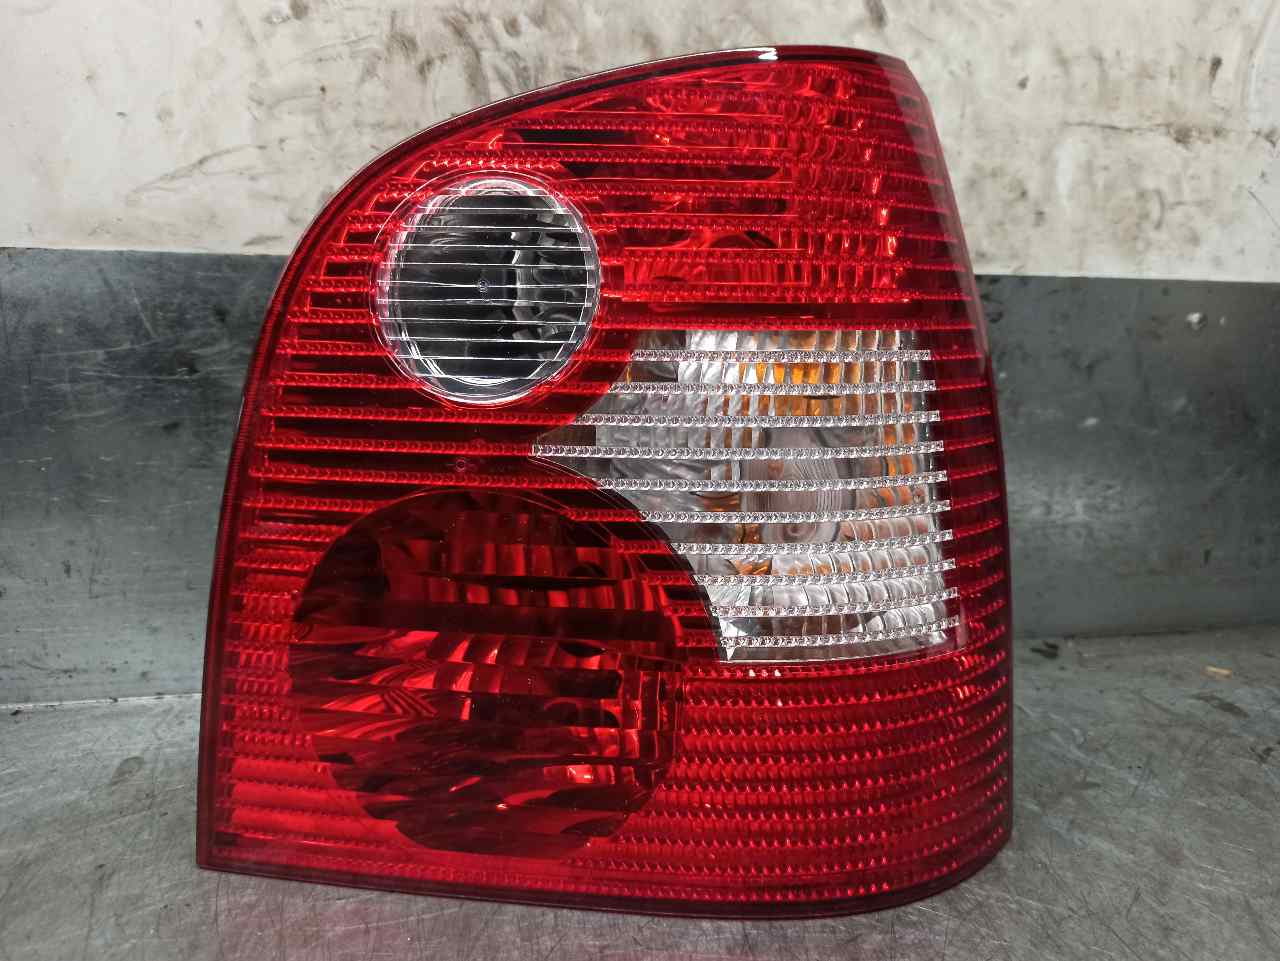 VOLKSWAGEN Polo 4 generation (2001-2009) Rear Right Taillight Lamp 6Q6945112A, 5PUERTAS 19785318